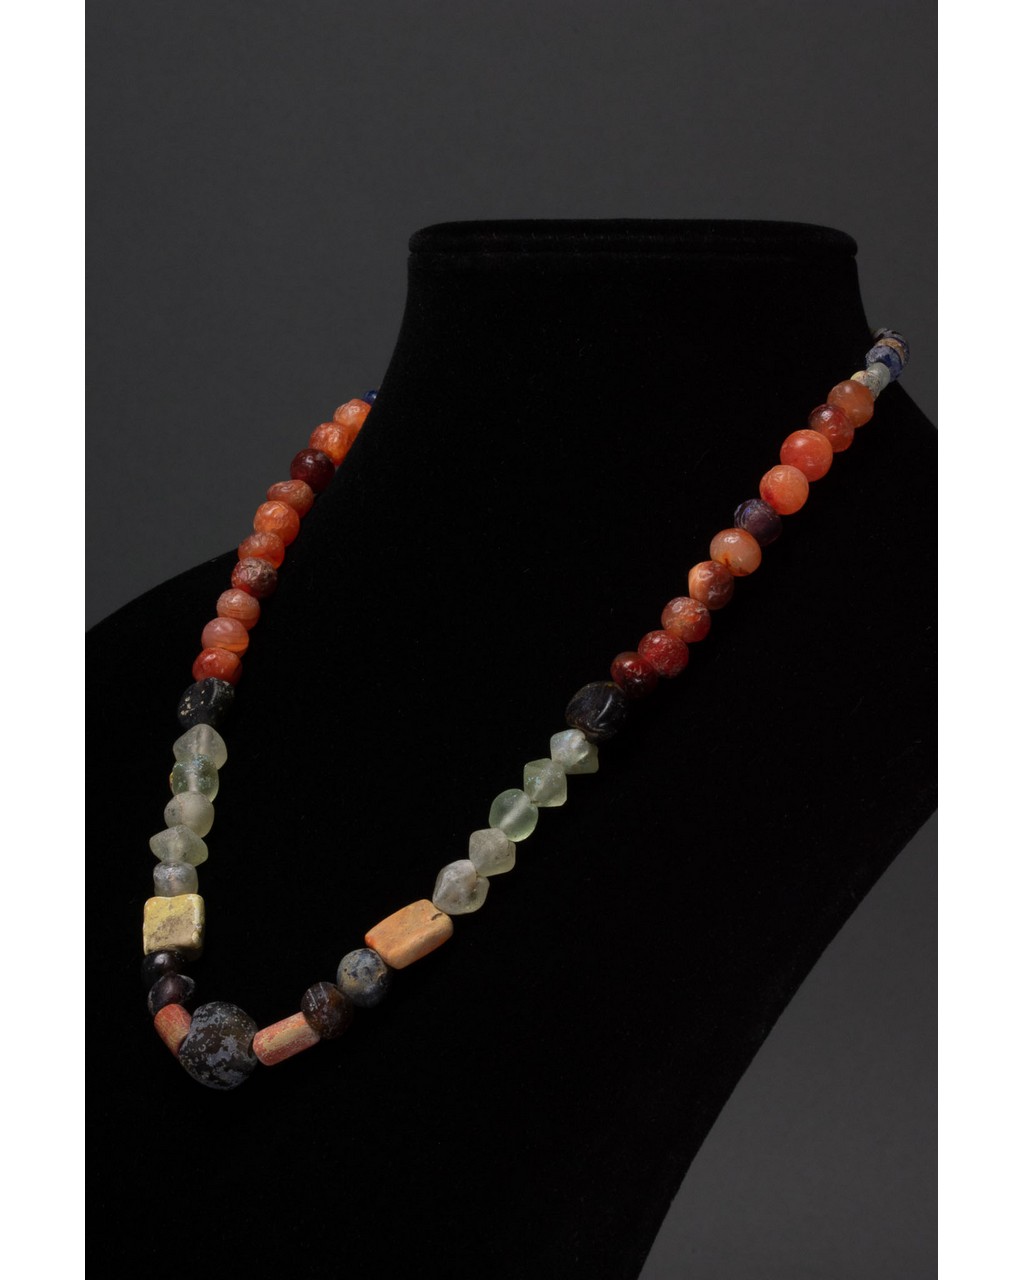 ROMAN GLASS AND STONE BEADED NECKLACE - Image 2 of 5